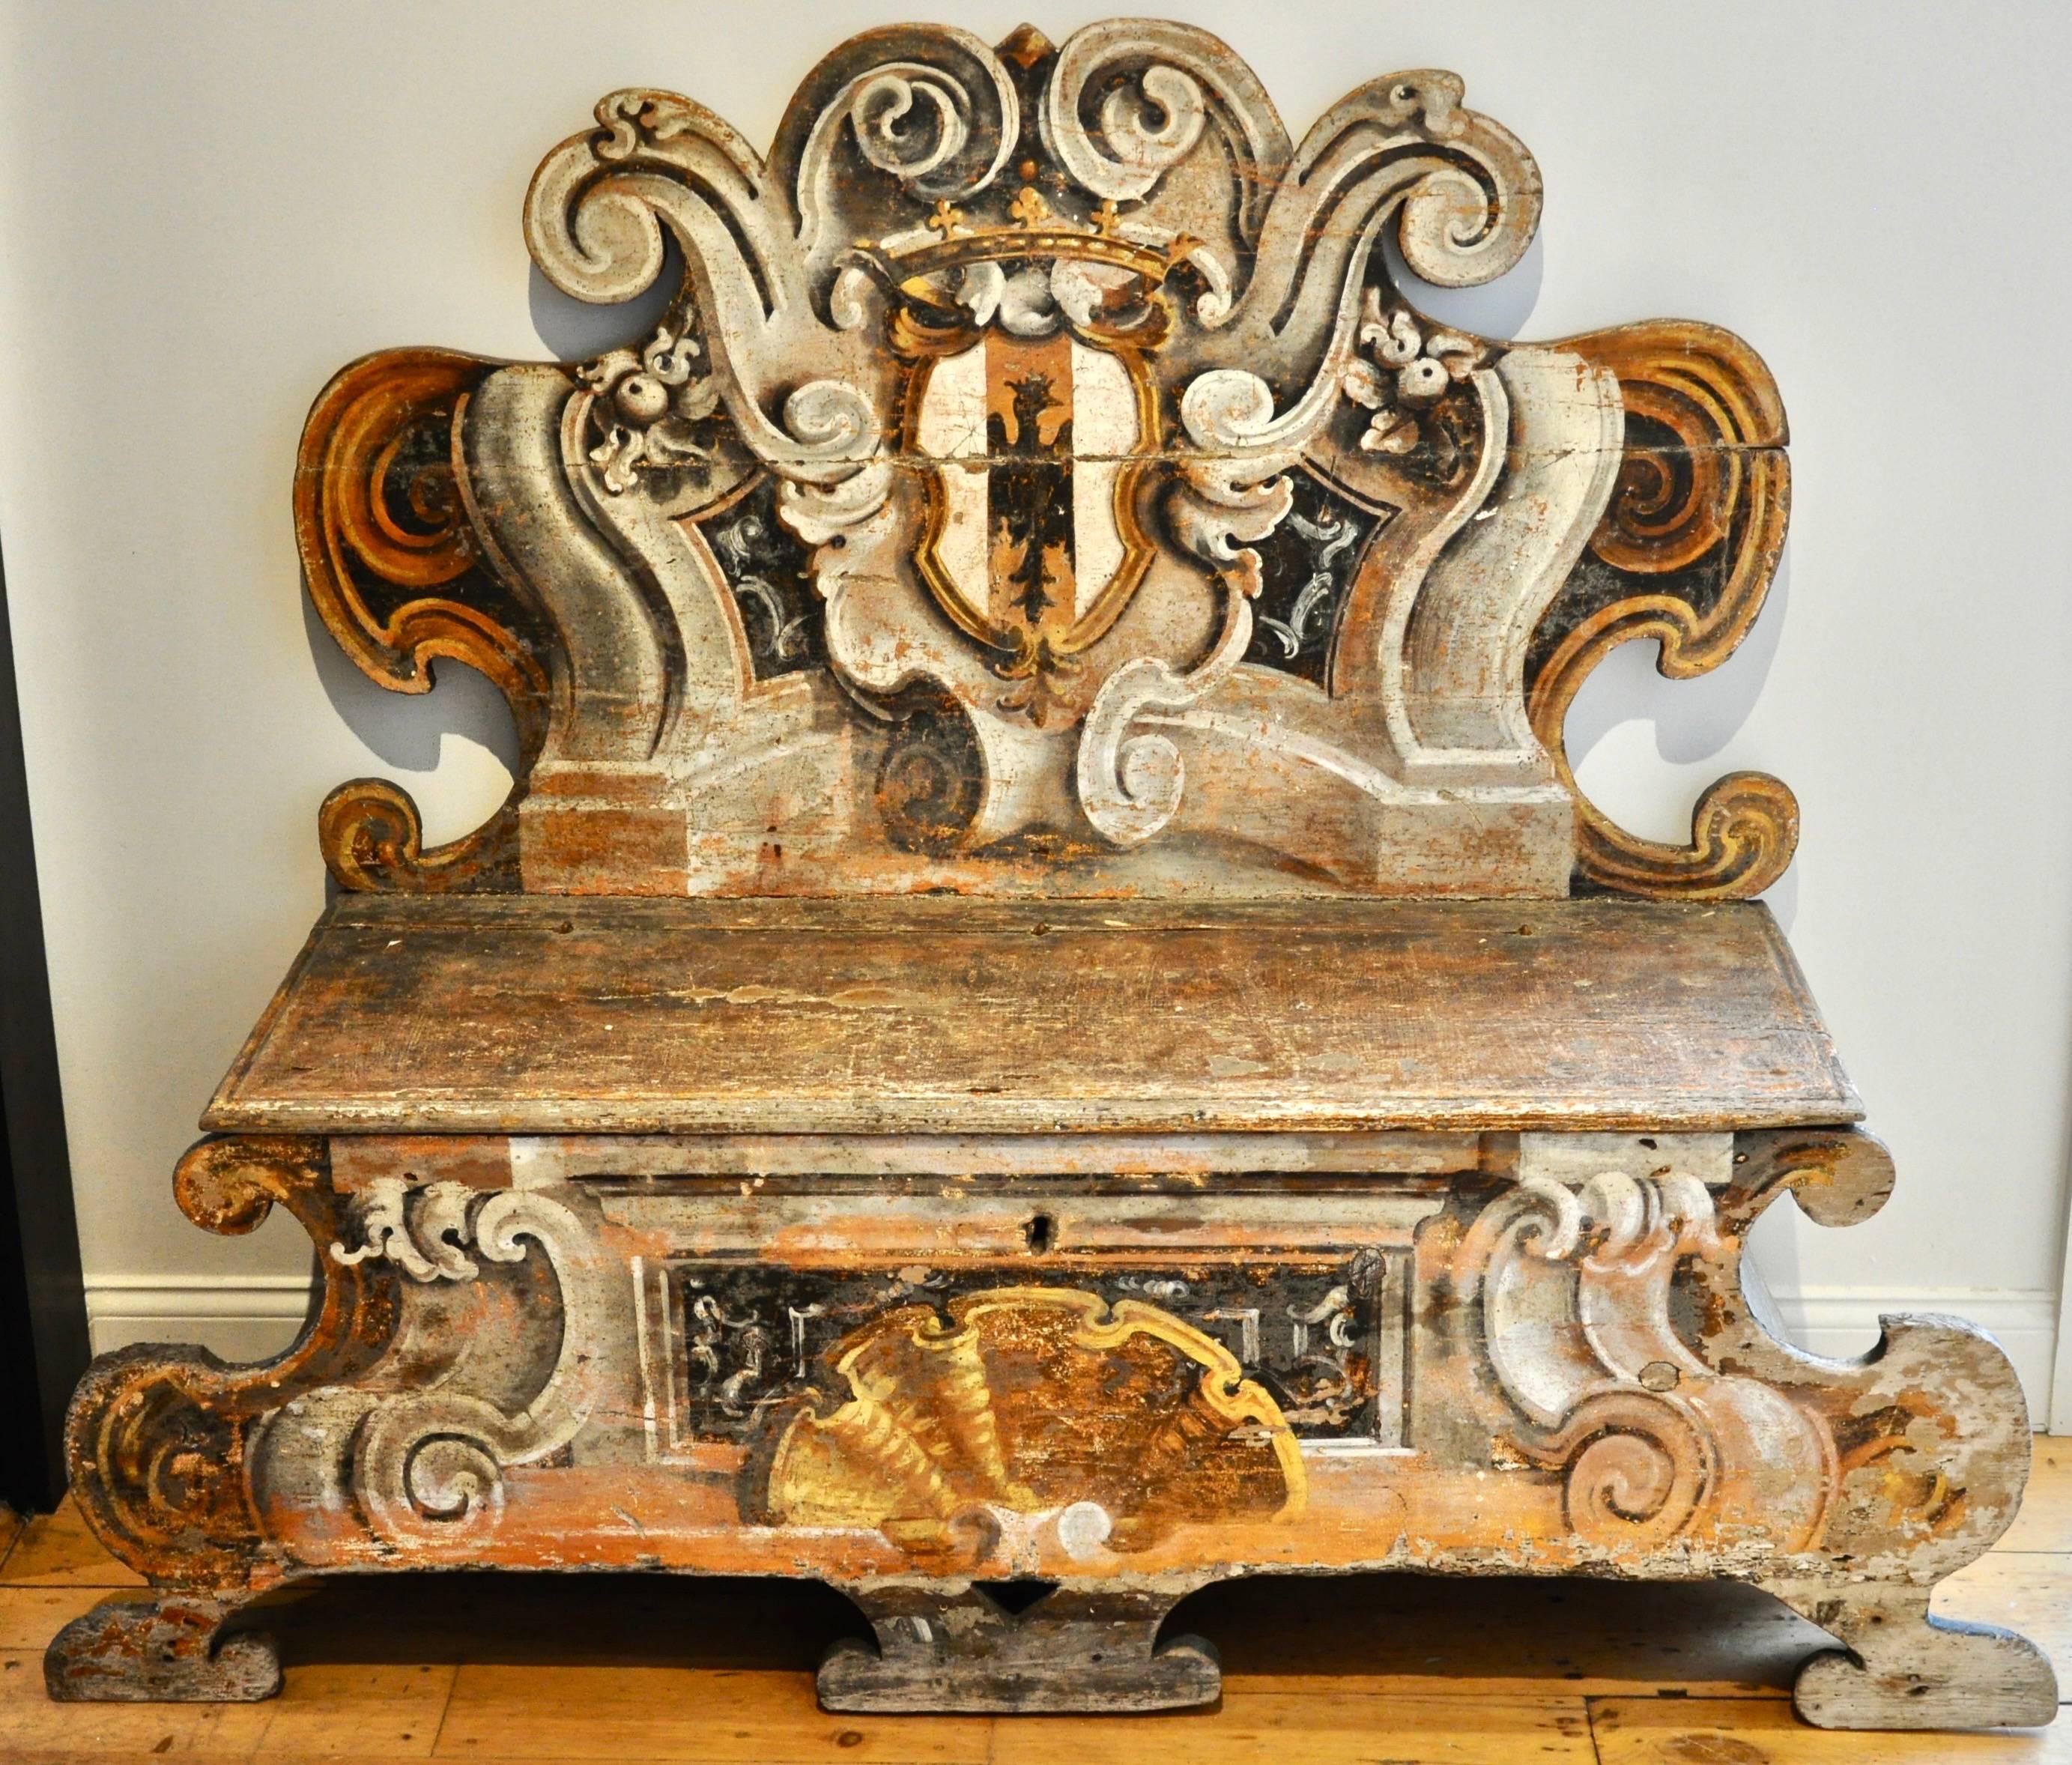 Incredible pair of Italian Baroque painted benches or Cassapanca

--Family crest of griffin on back 
--Baroque shell
--Seat lifts
--Originally for hallway or parade room.